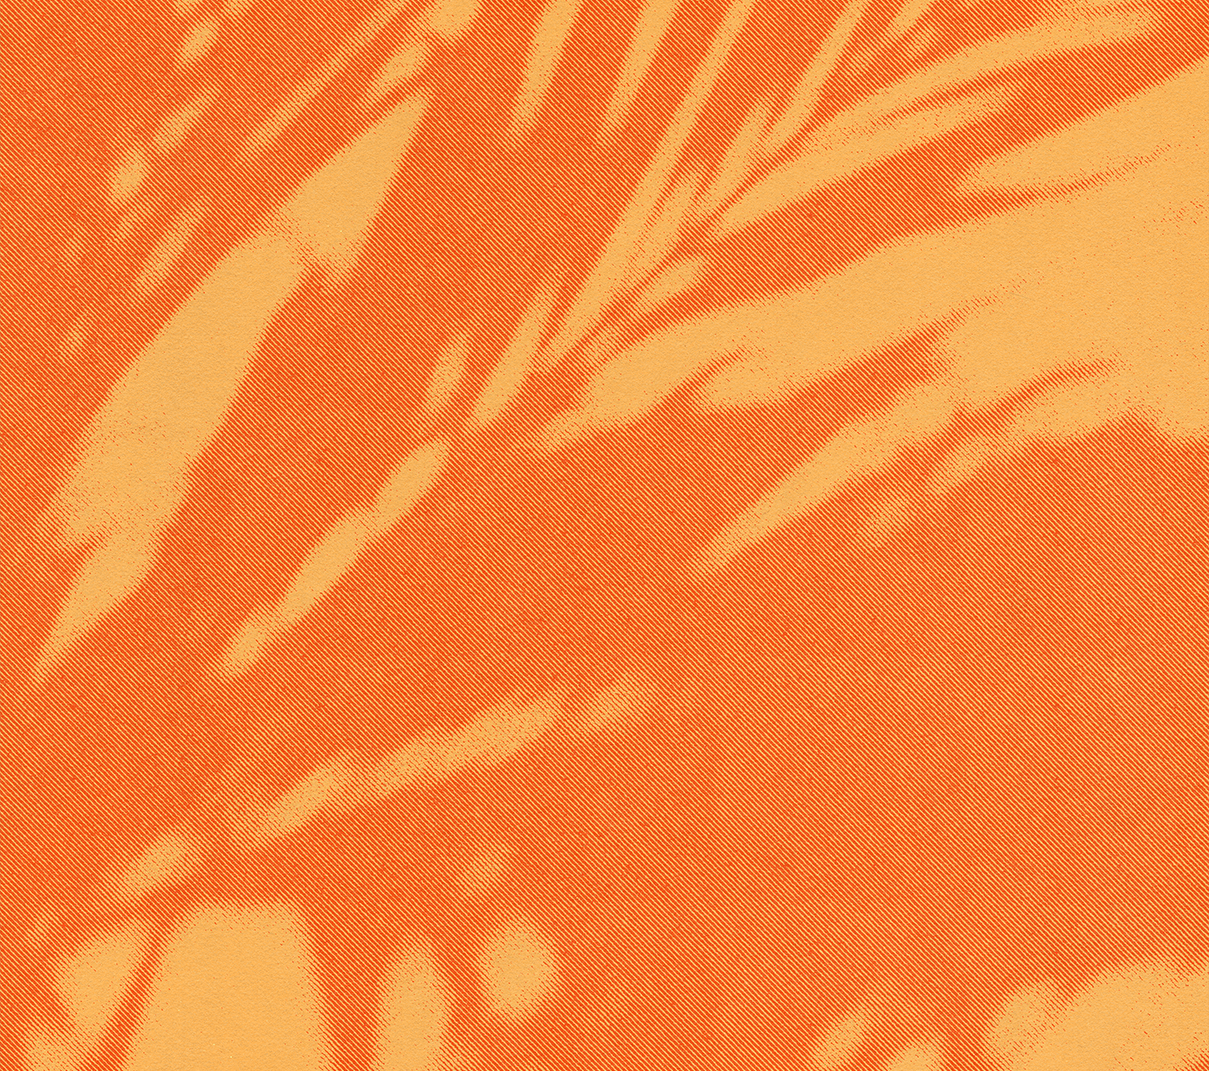 Halftone image of a palm tree shadow in orange peel and peach